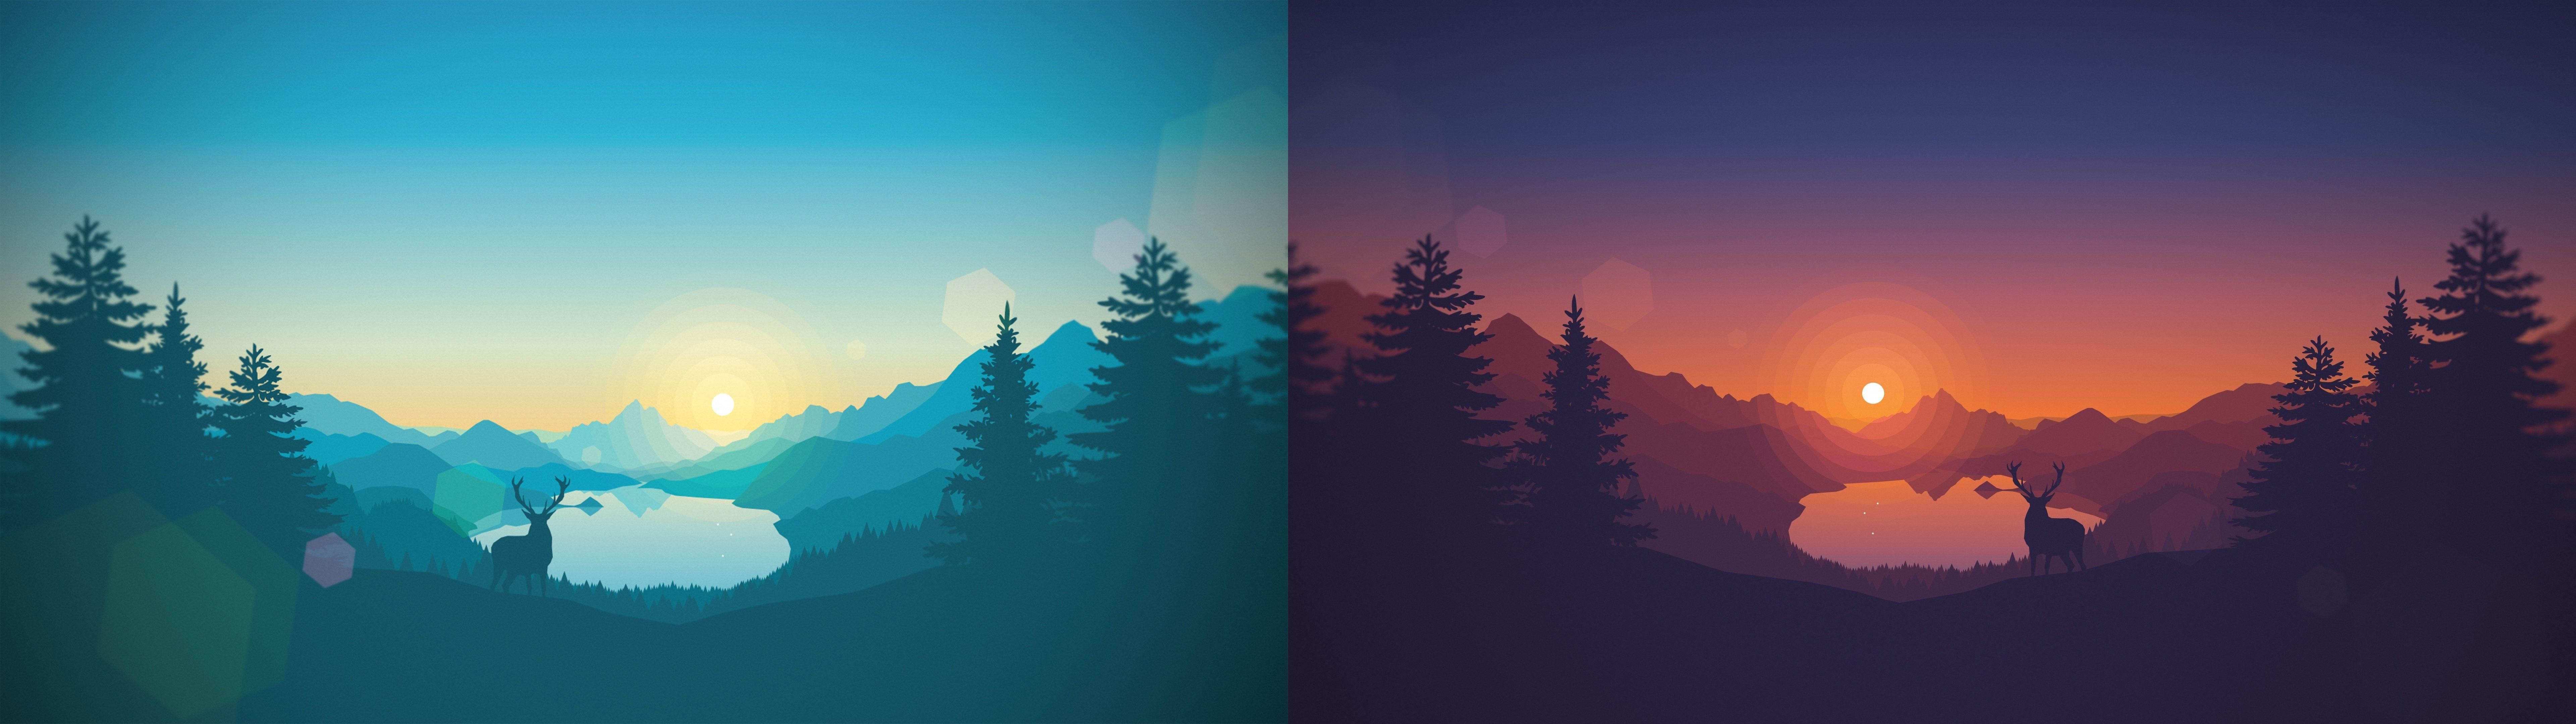 Threw two photo together to make a minimal dual screen wallpaper [7860x2160]. Dual screen wallpaper, Dual monitor wallpaper, Desktop wallpaper background